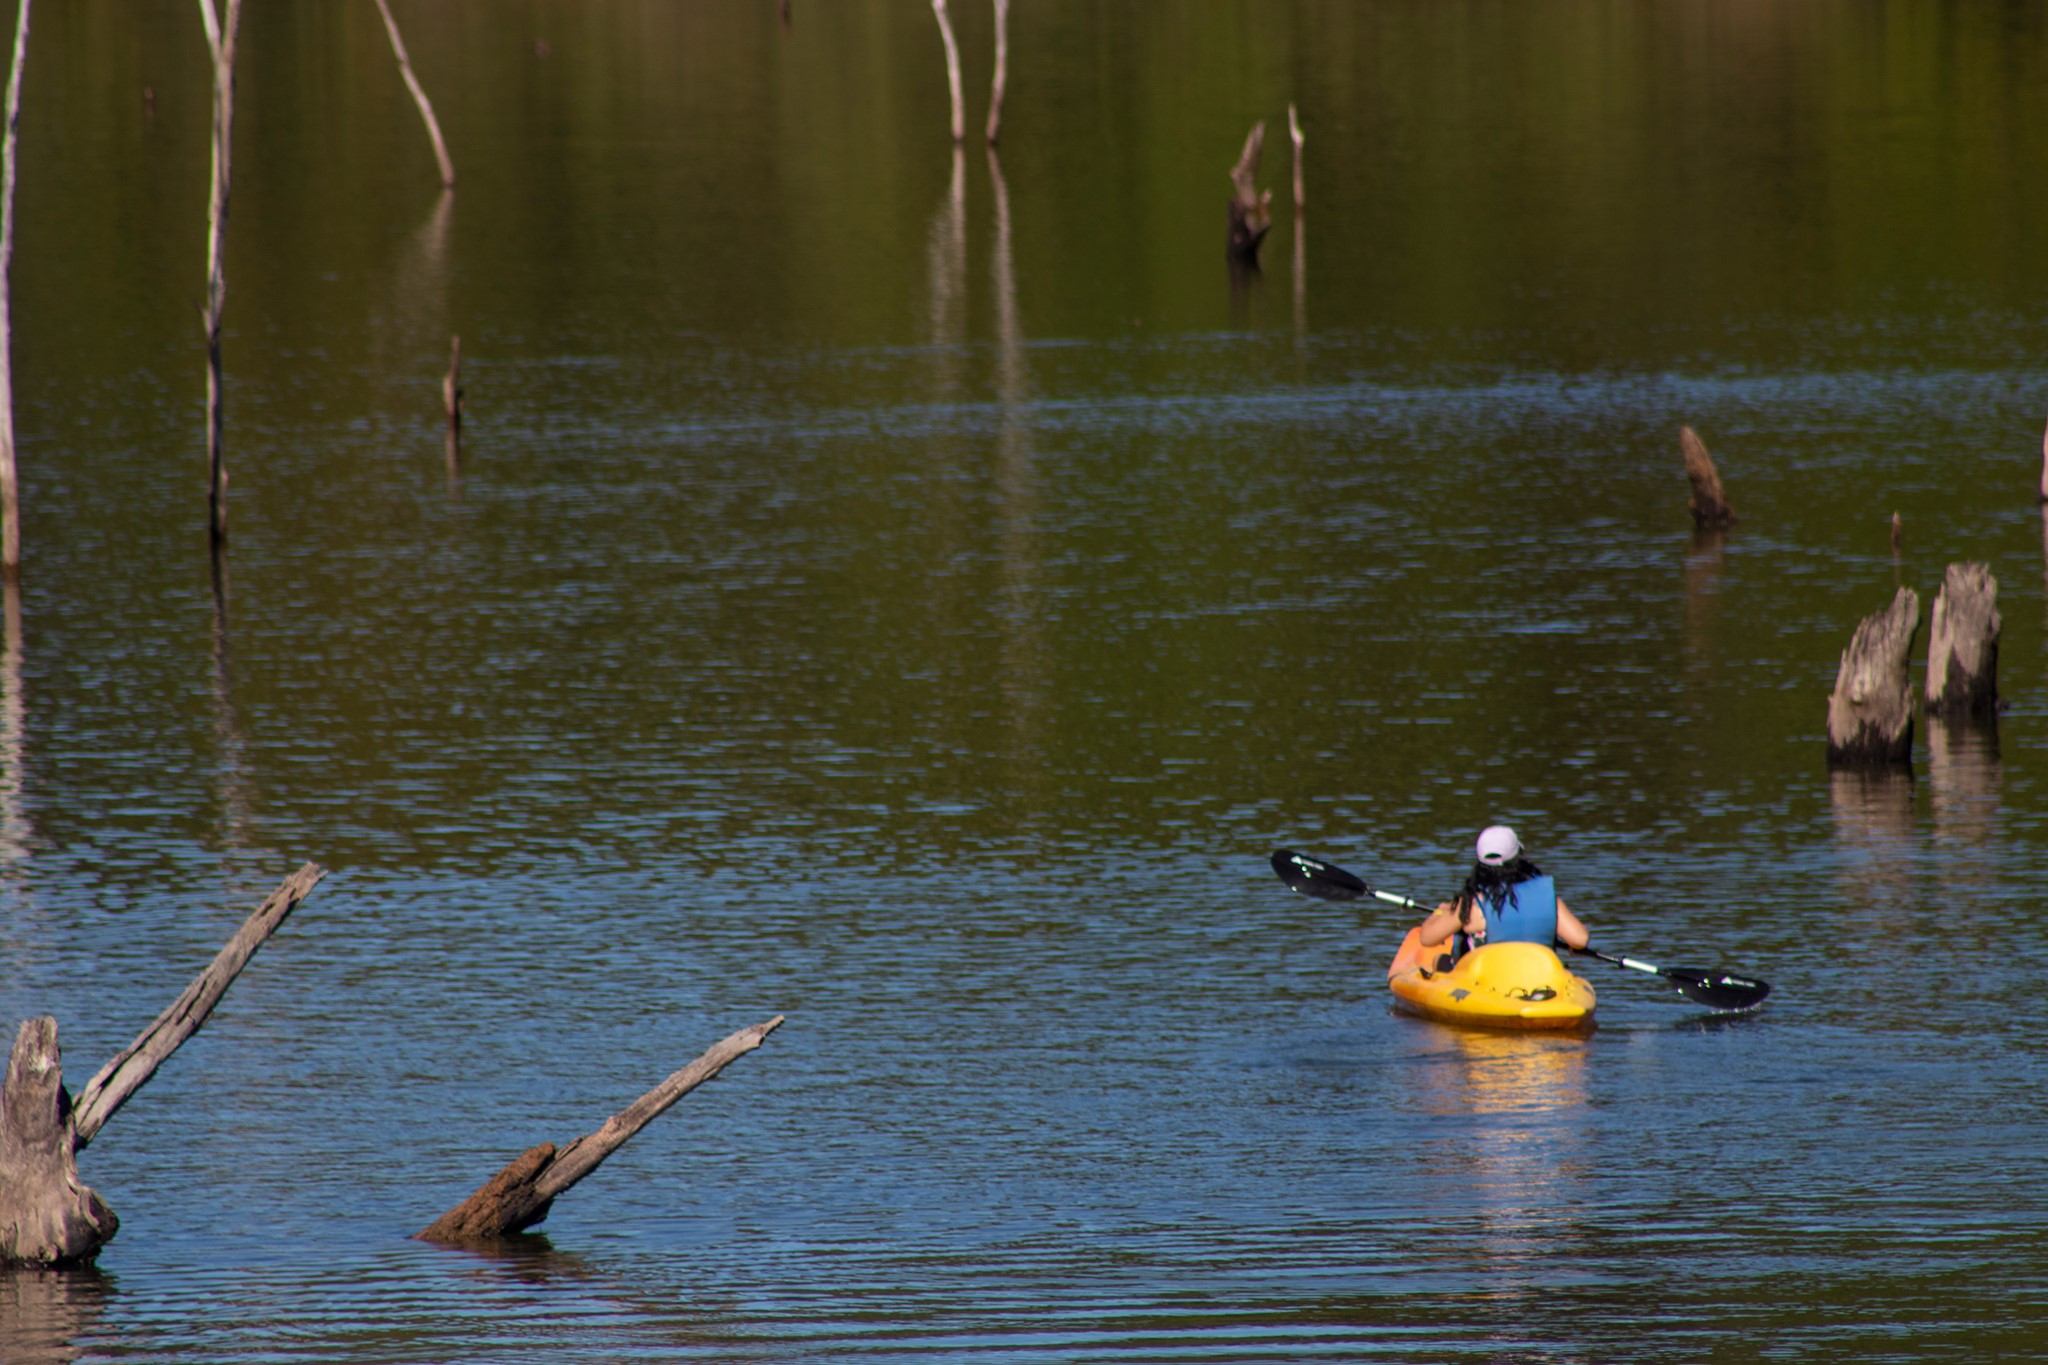 A student paddles through a placid lake, with the remnants of flooded trees poking through the water. GSC's student activities group often leads such excursions.